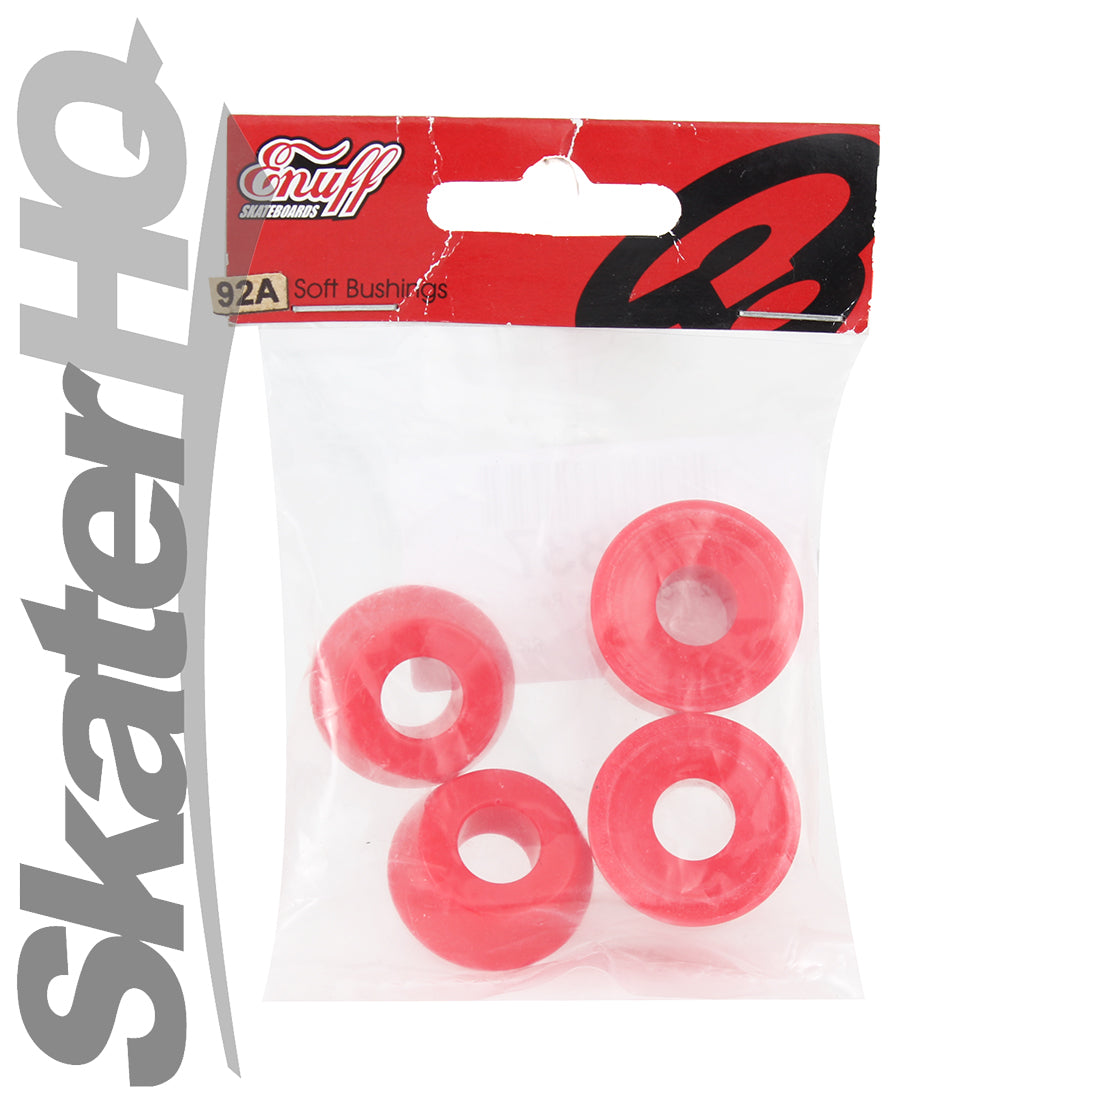 Enuff 92a Cushions Red - 4pk Skateboard Hardware and Parts